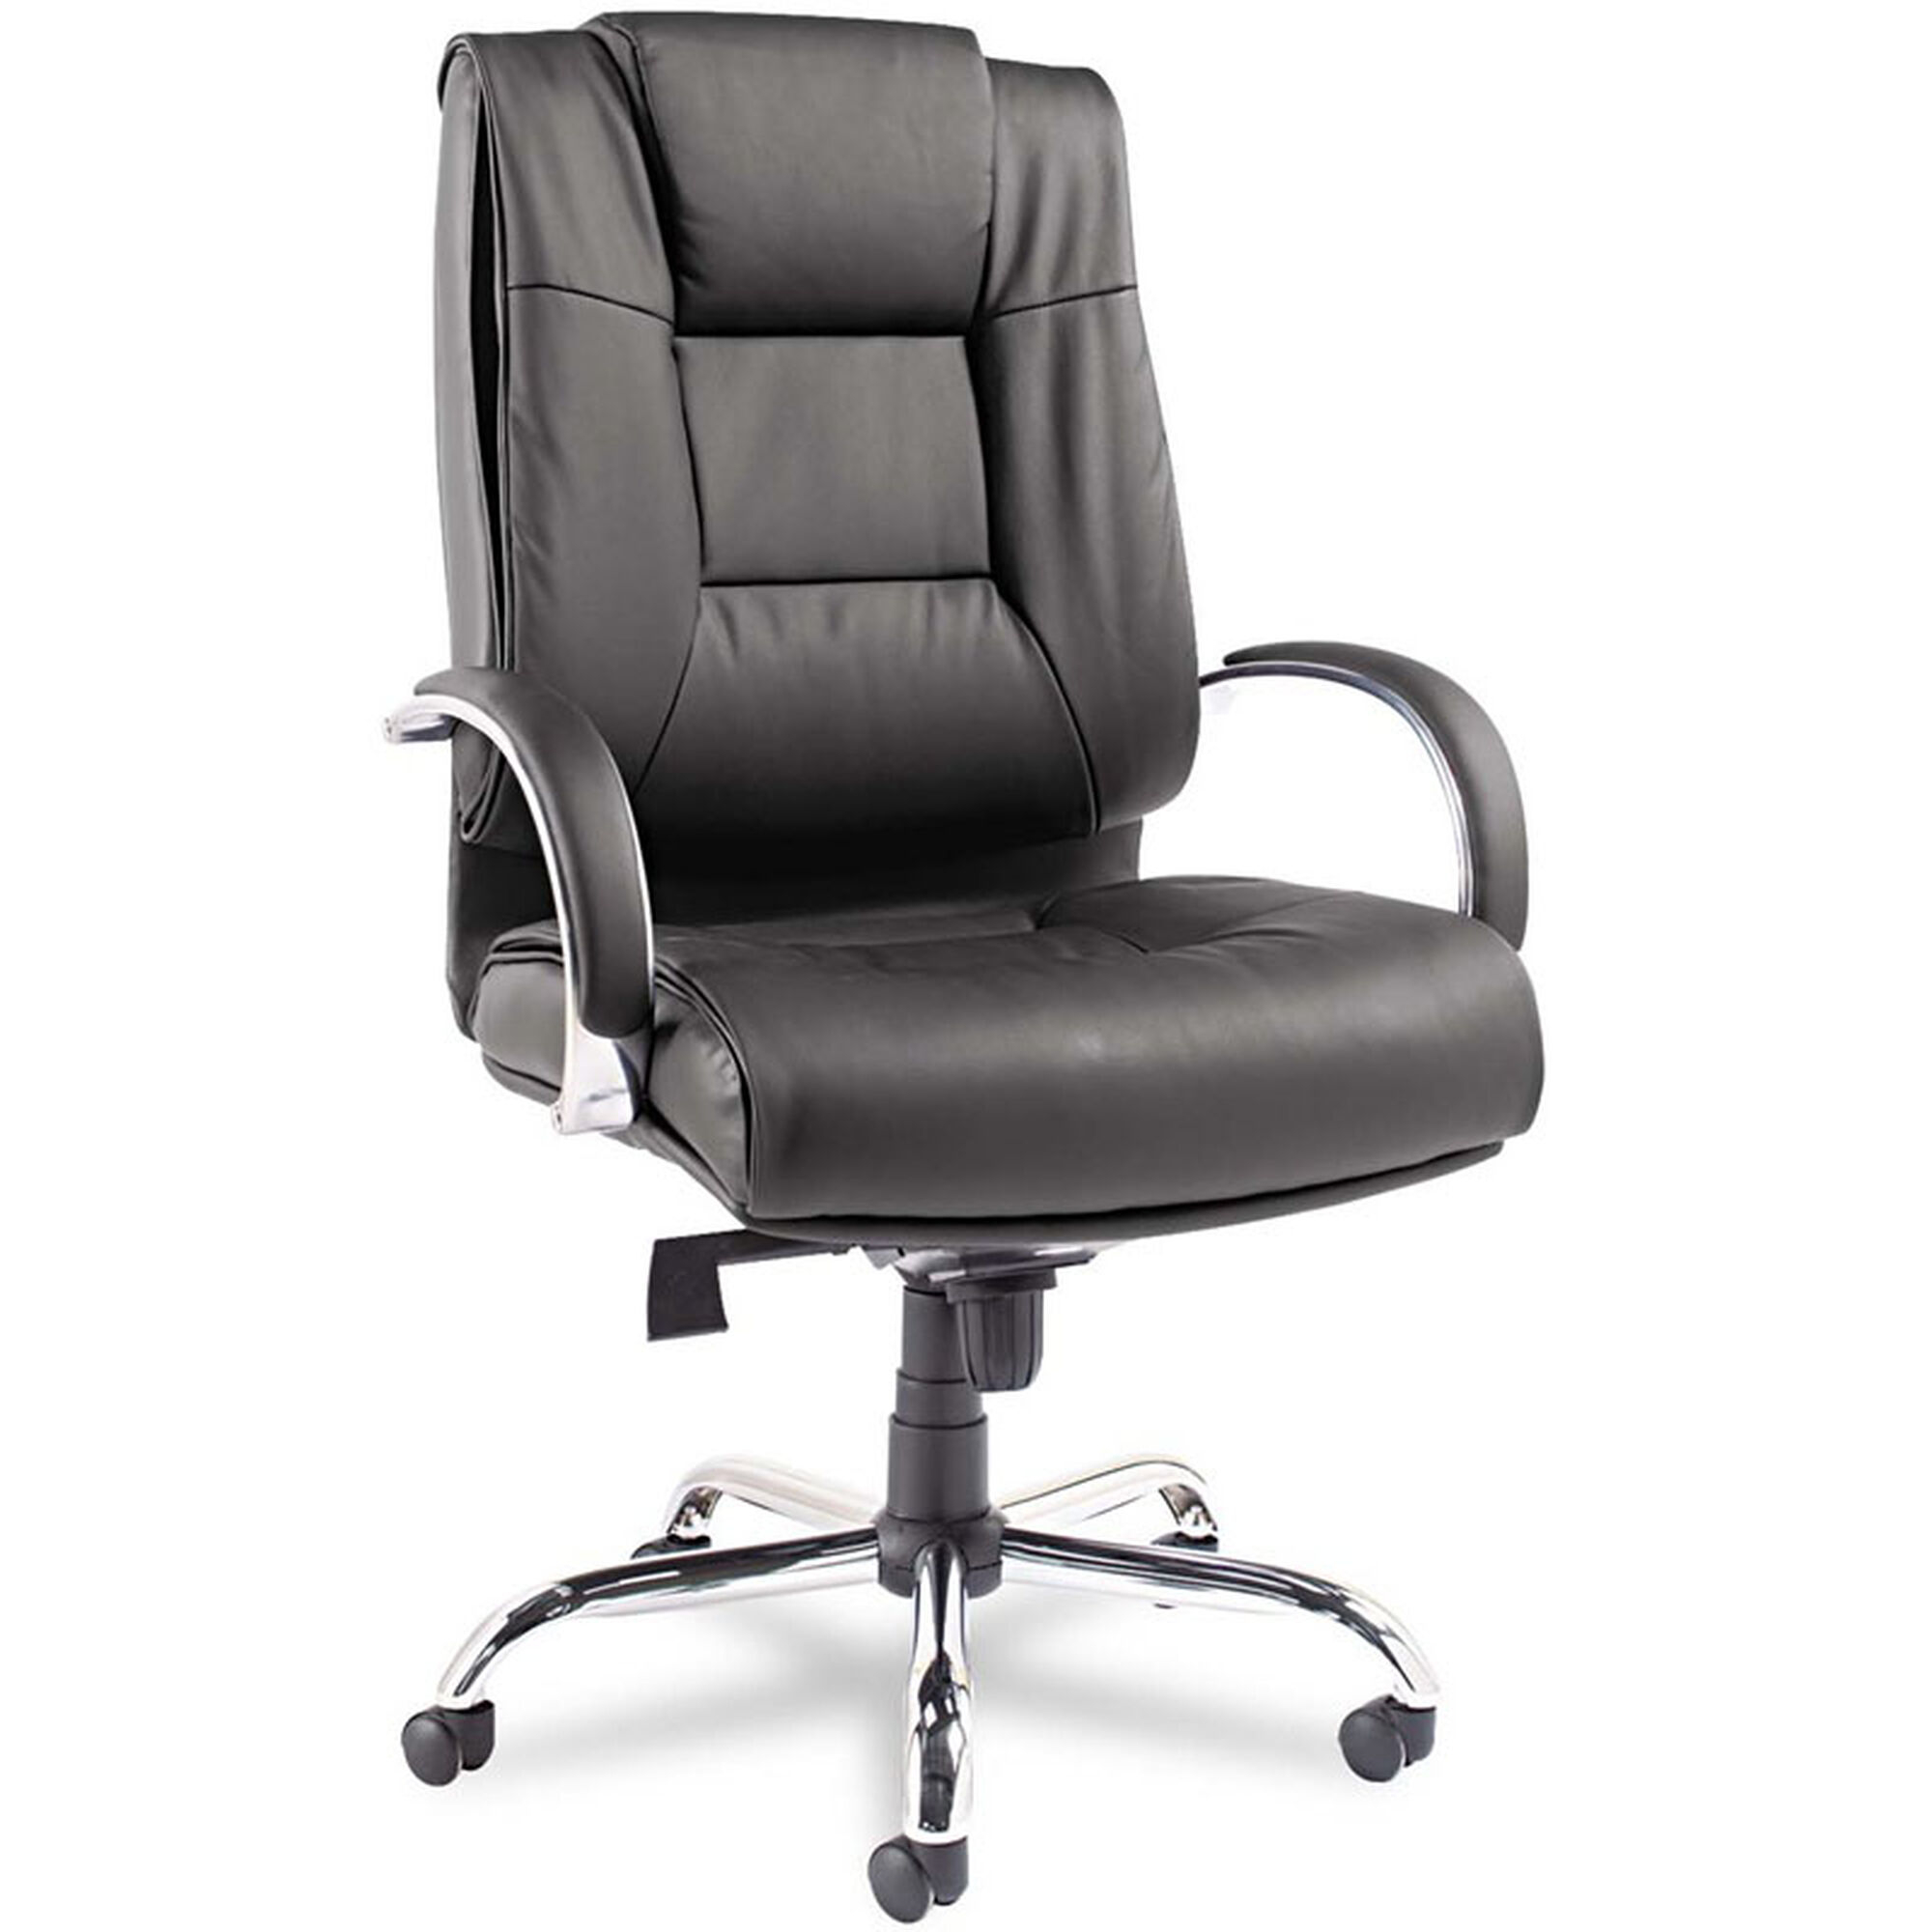 Orthopedic office chairs 4